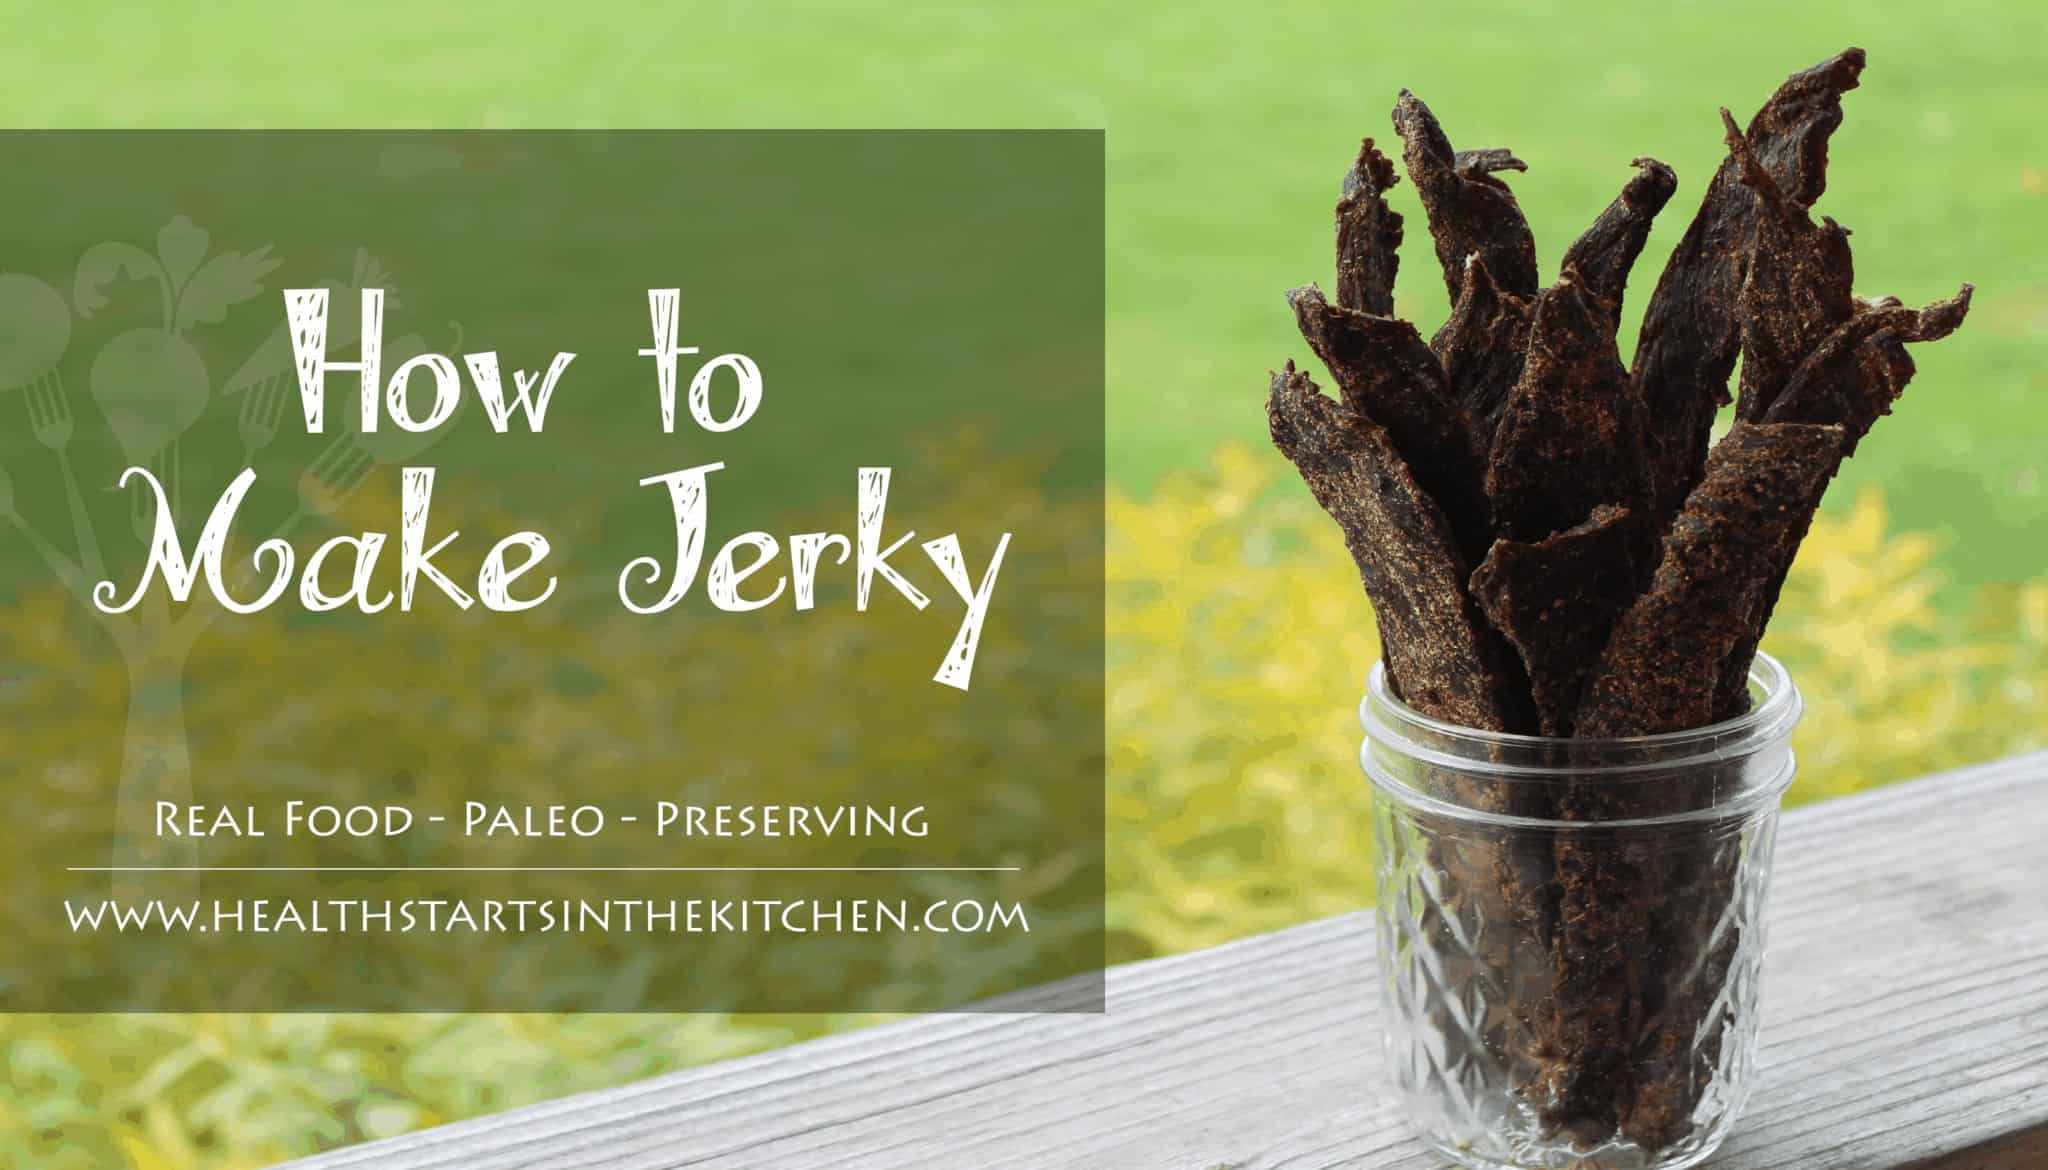 Make your own Jerky